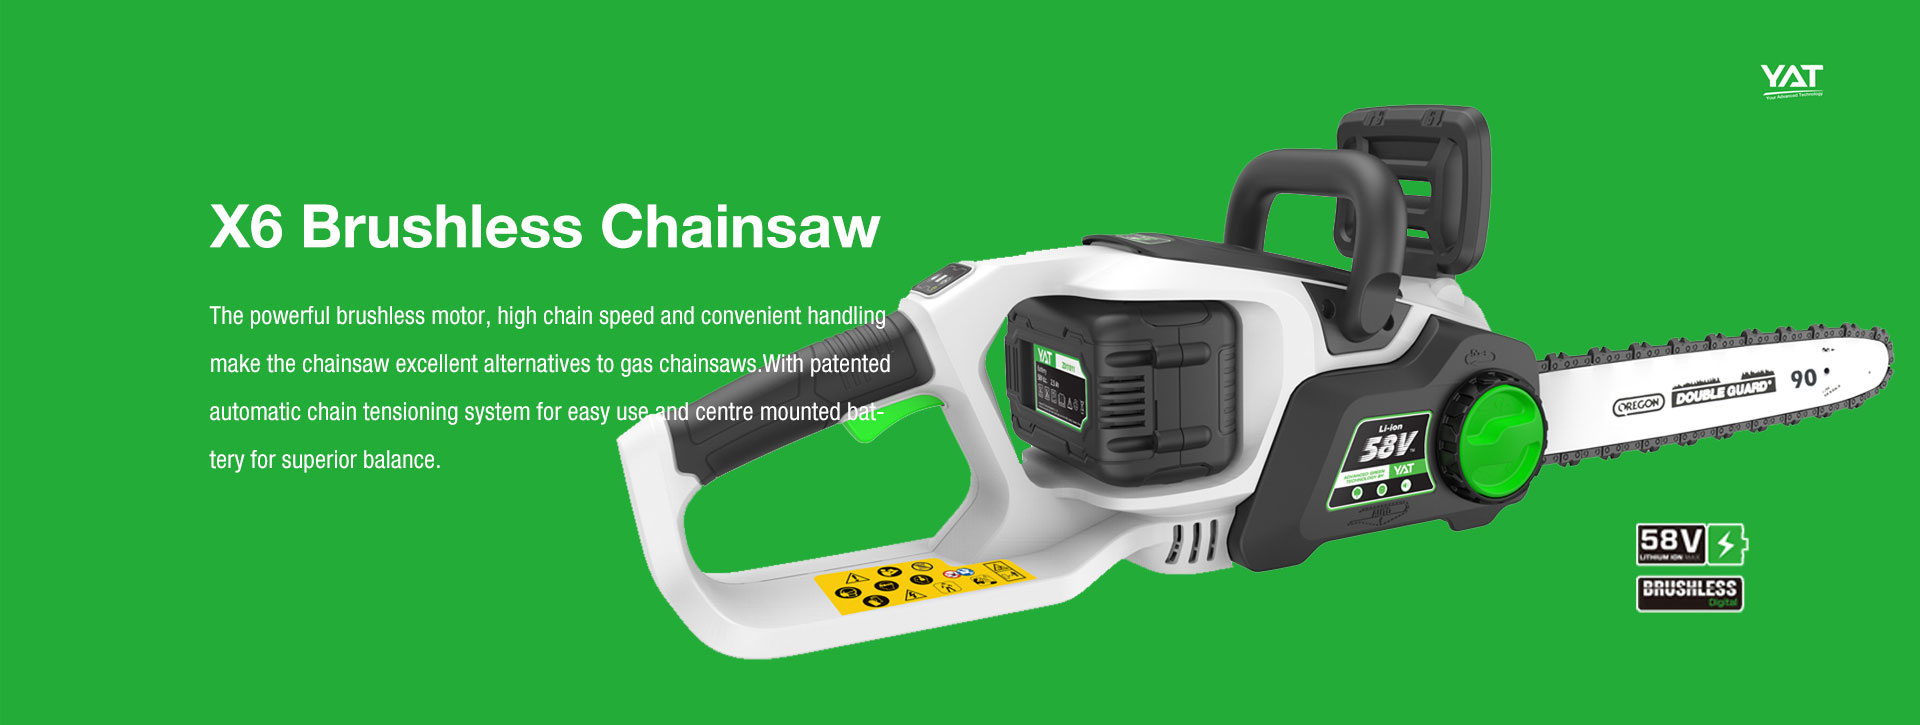 X6 BRUSHLESS CHAINSAW